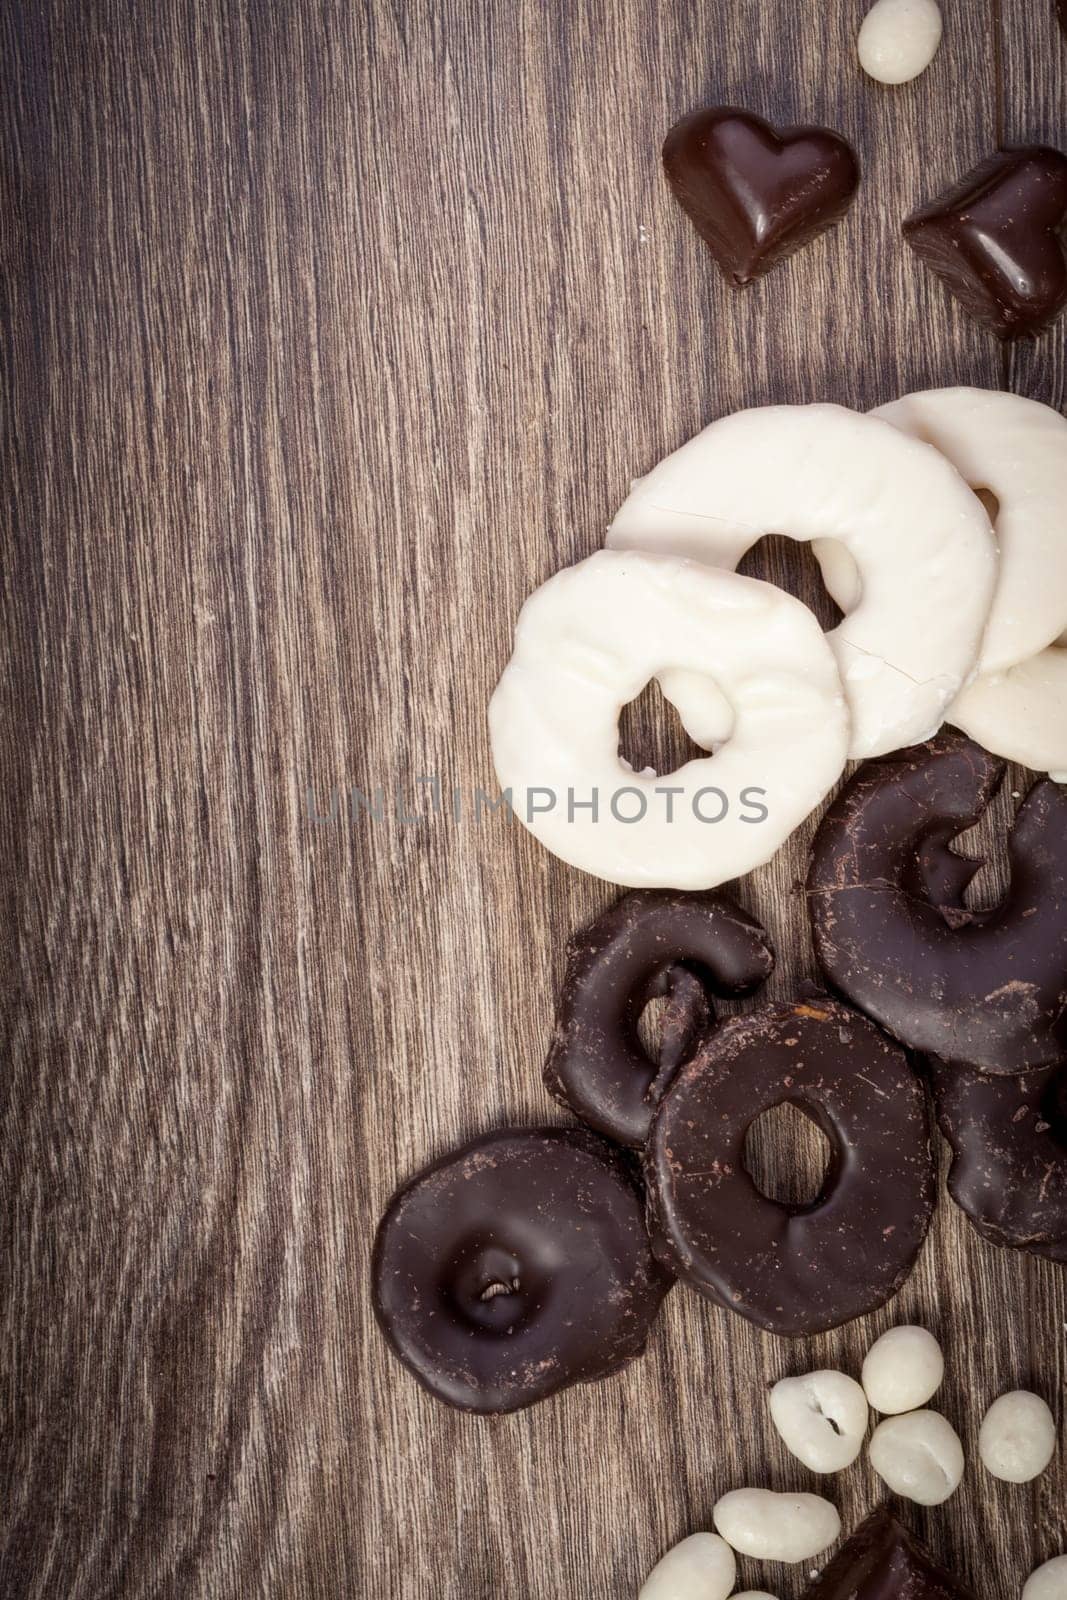 Chocolate and heart shaped desert on wooden background in studio photo with copyright space